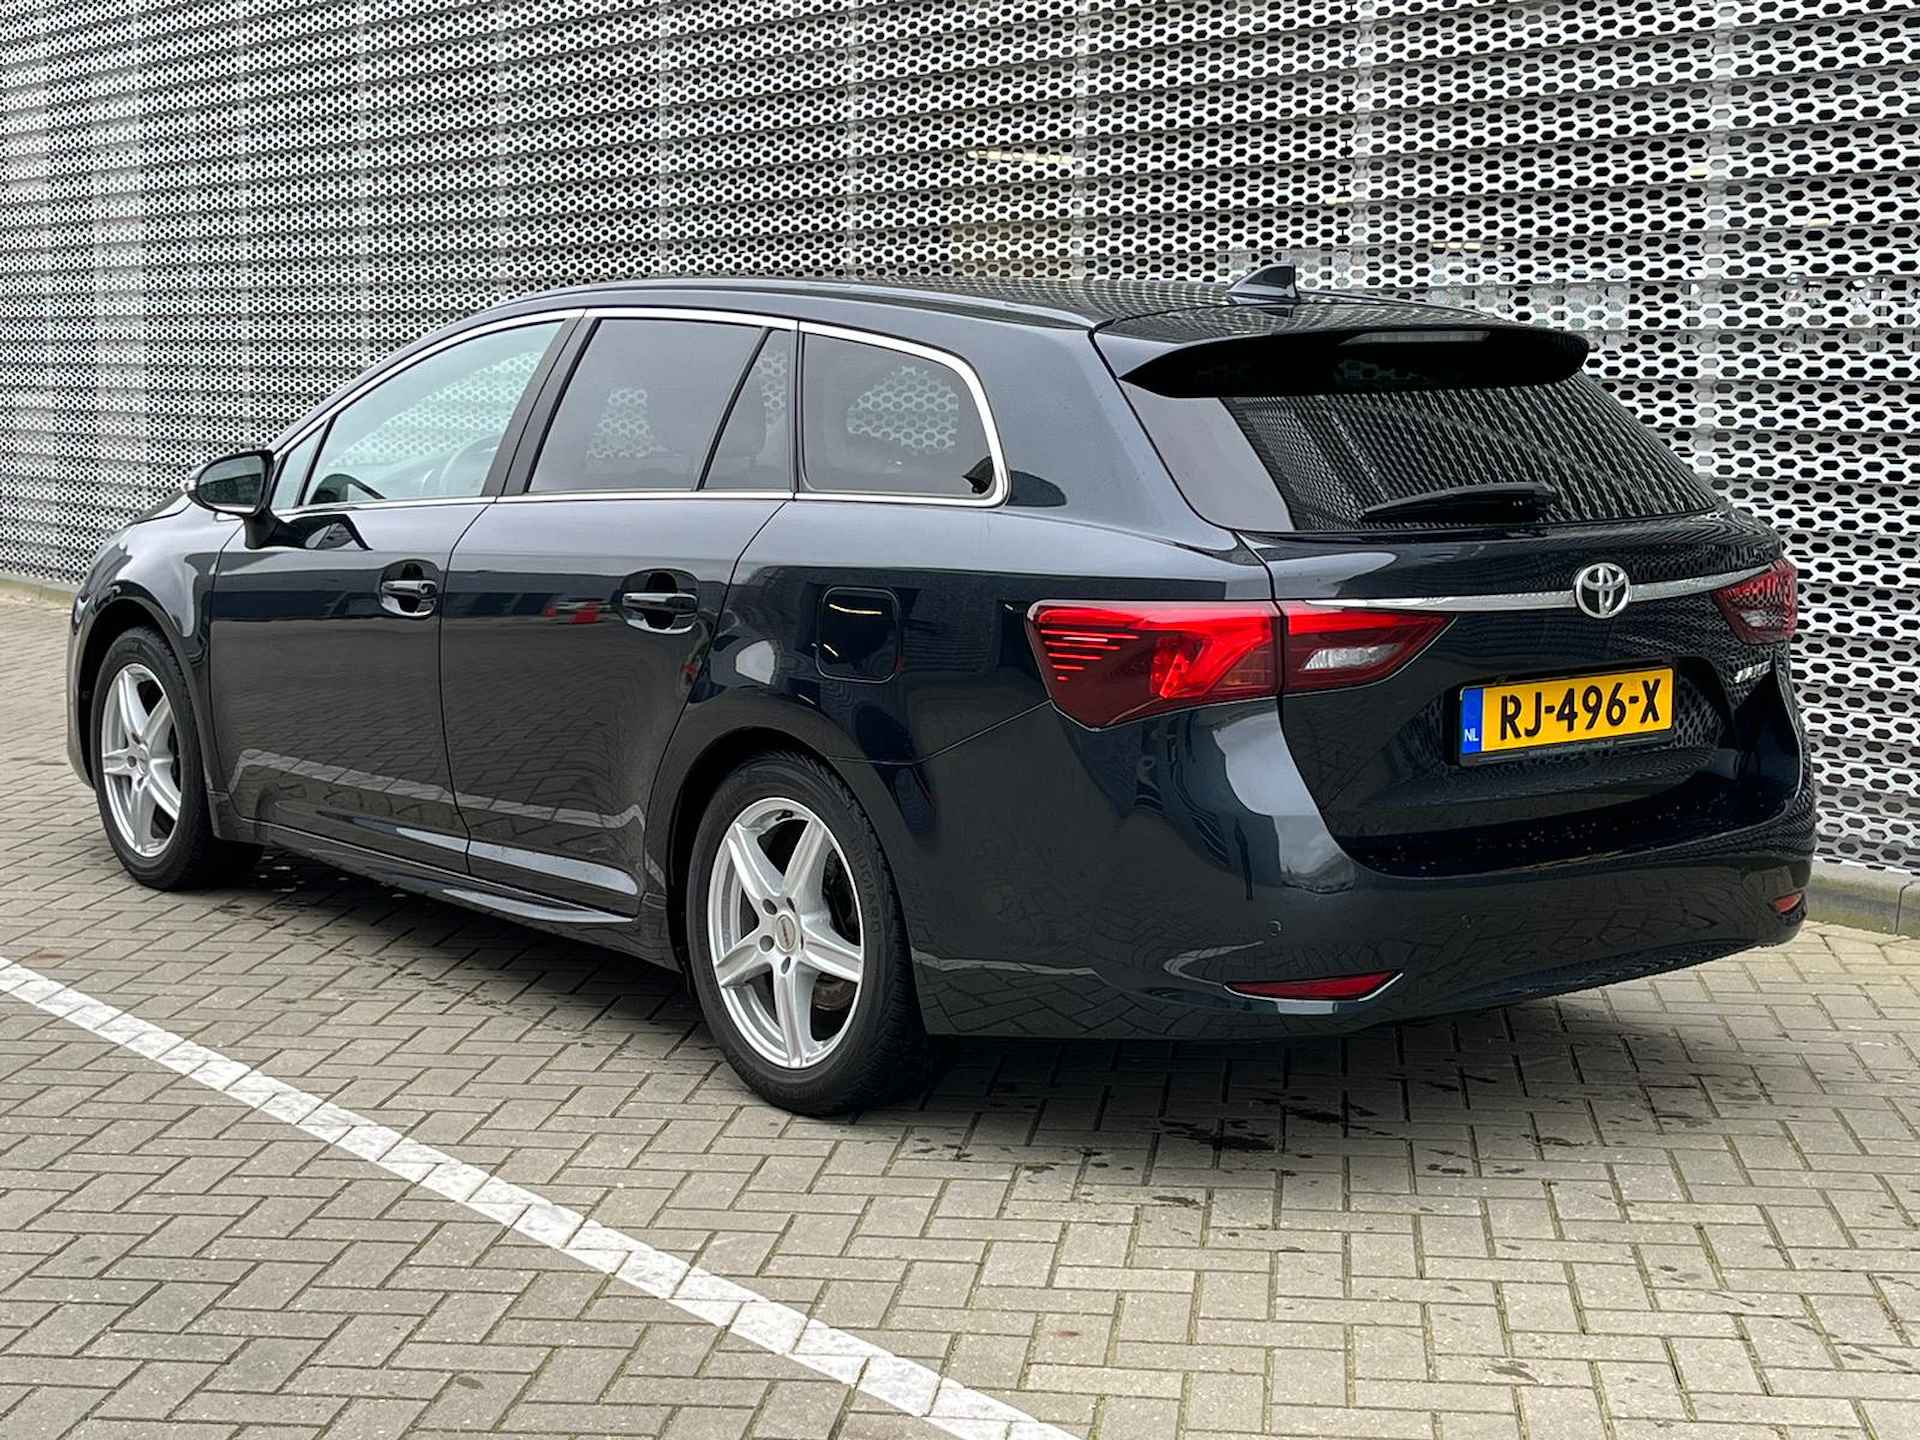 Toyota Avensis Touring Sports 1.8 VVT-i SkyView Edition - 6/28